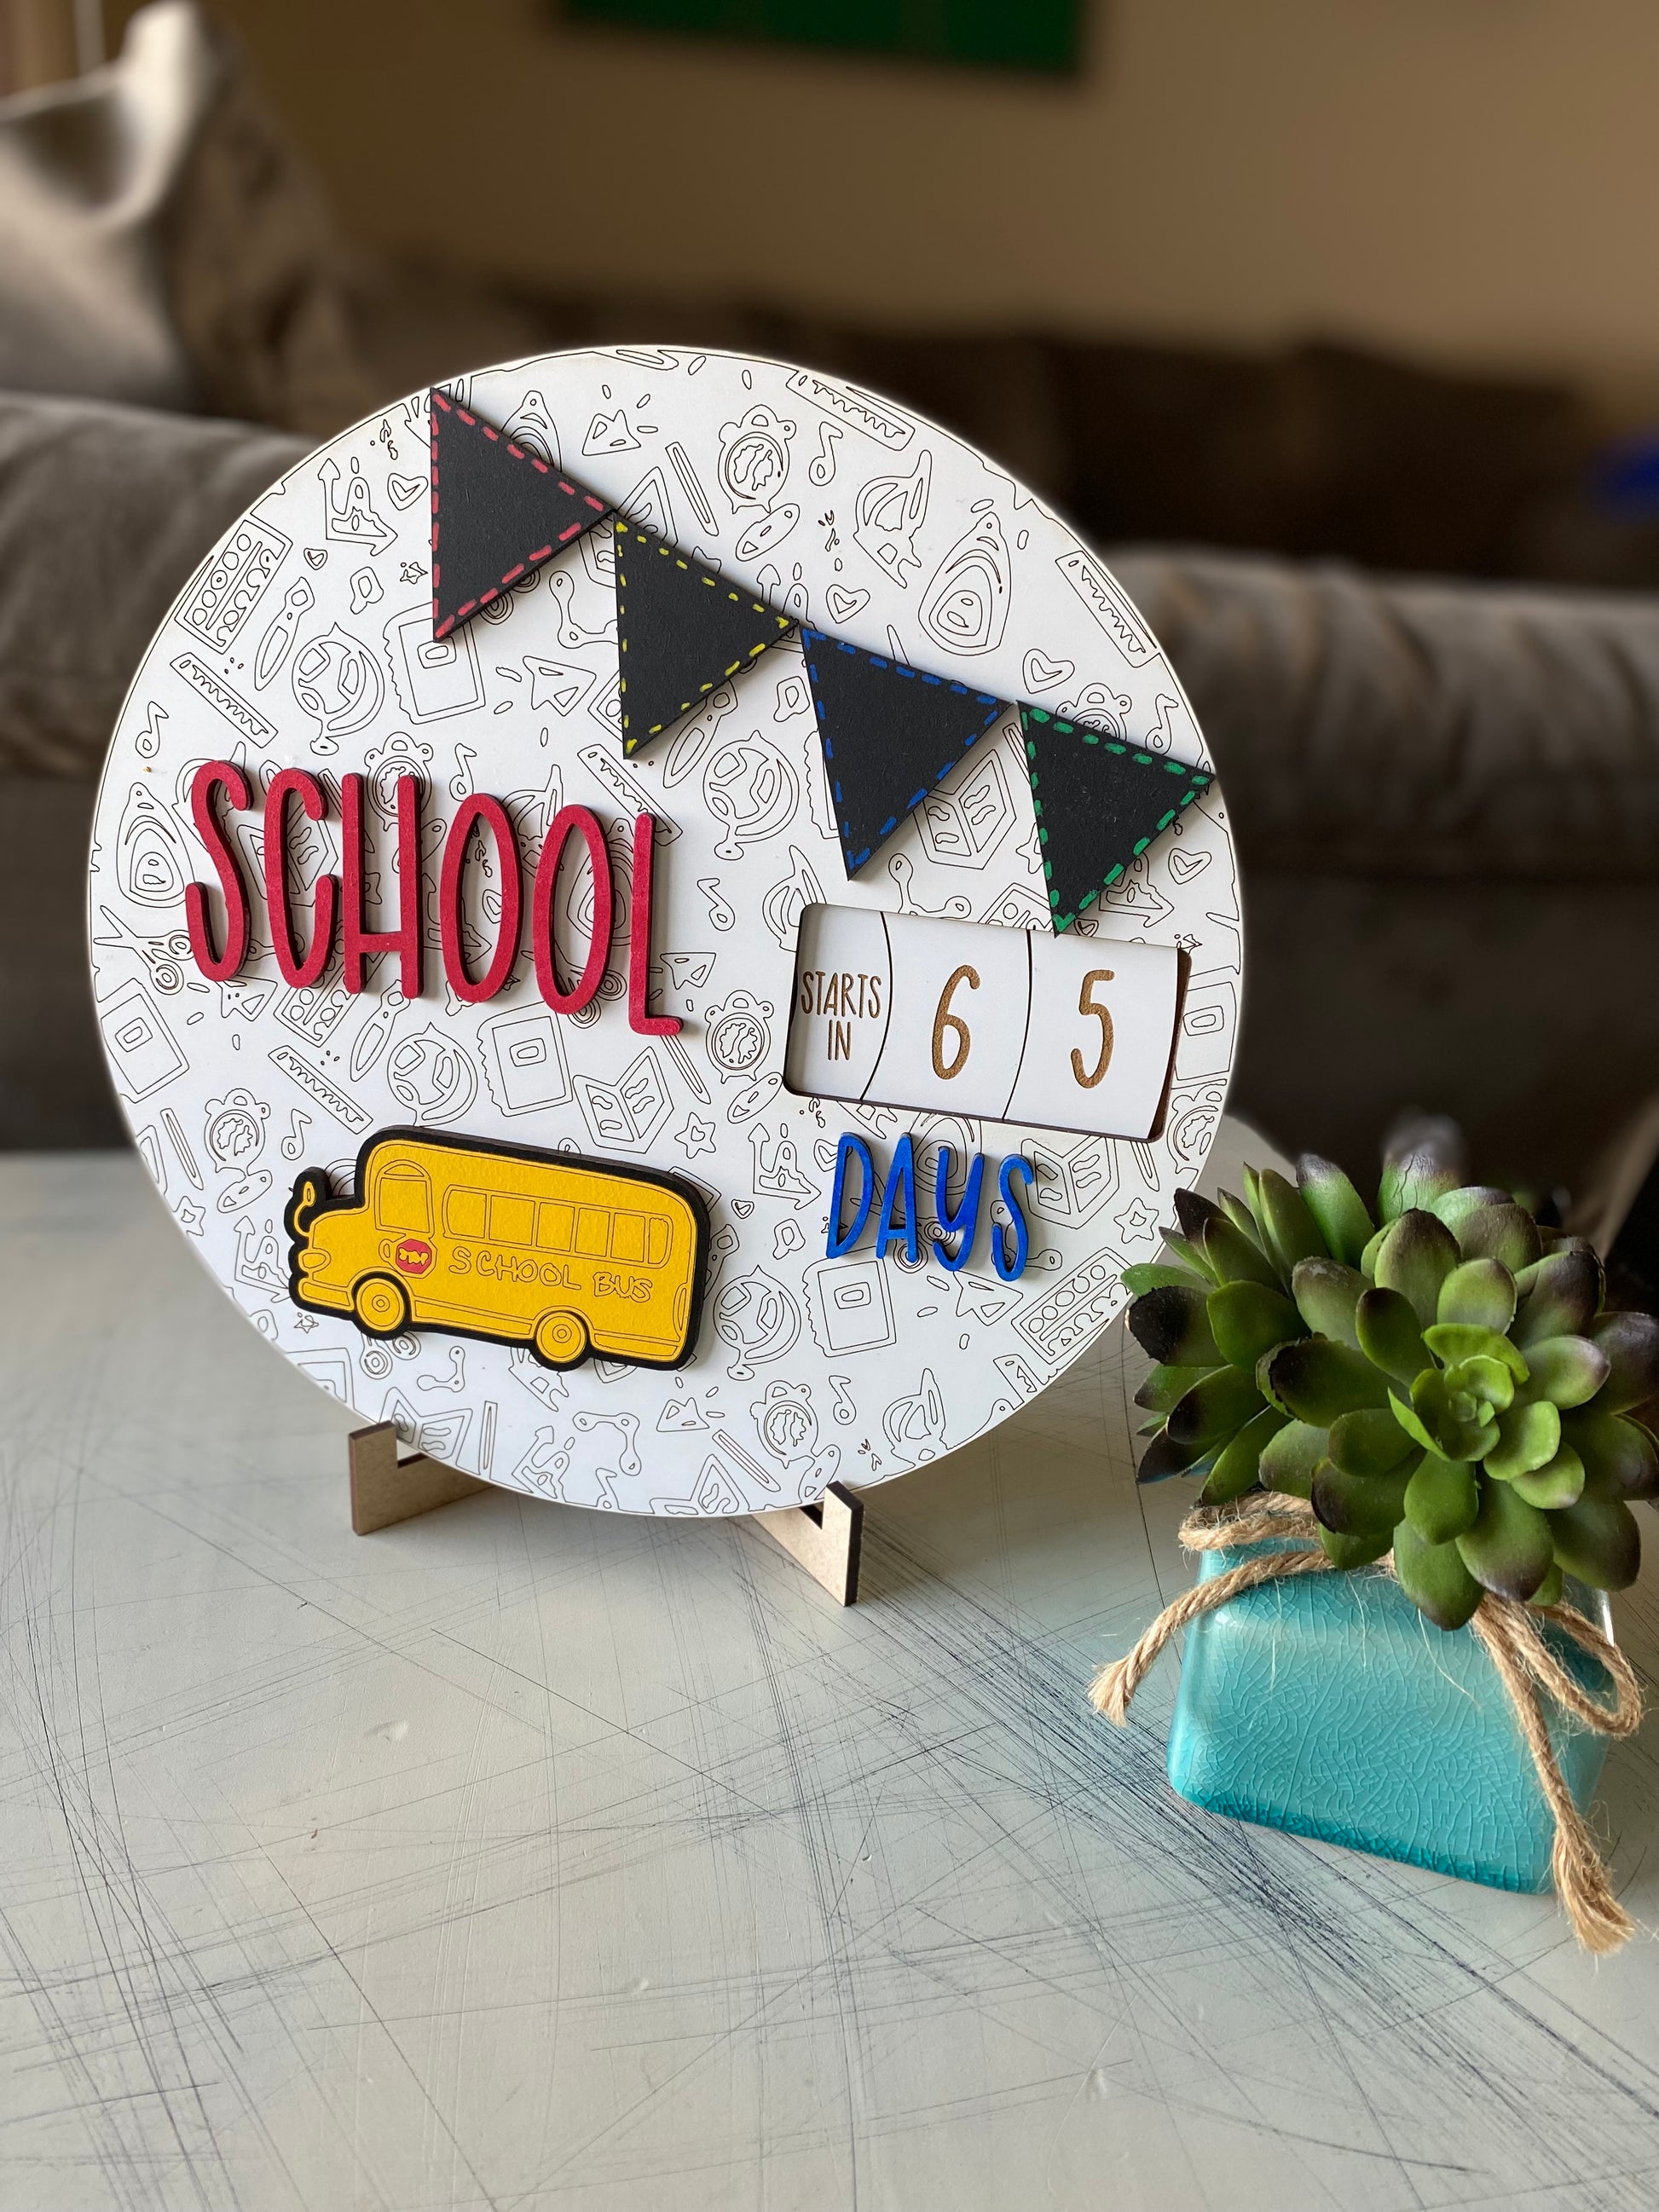 School countdown calendar sign - countdown calendar with self-contained numbers - Novotny Designs